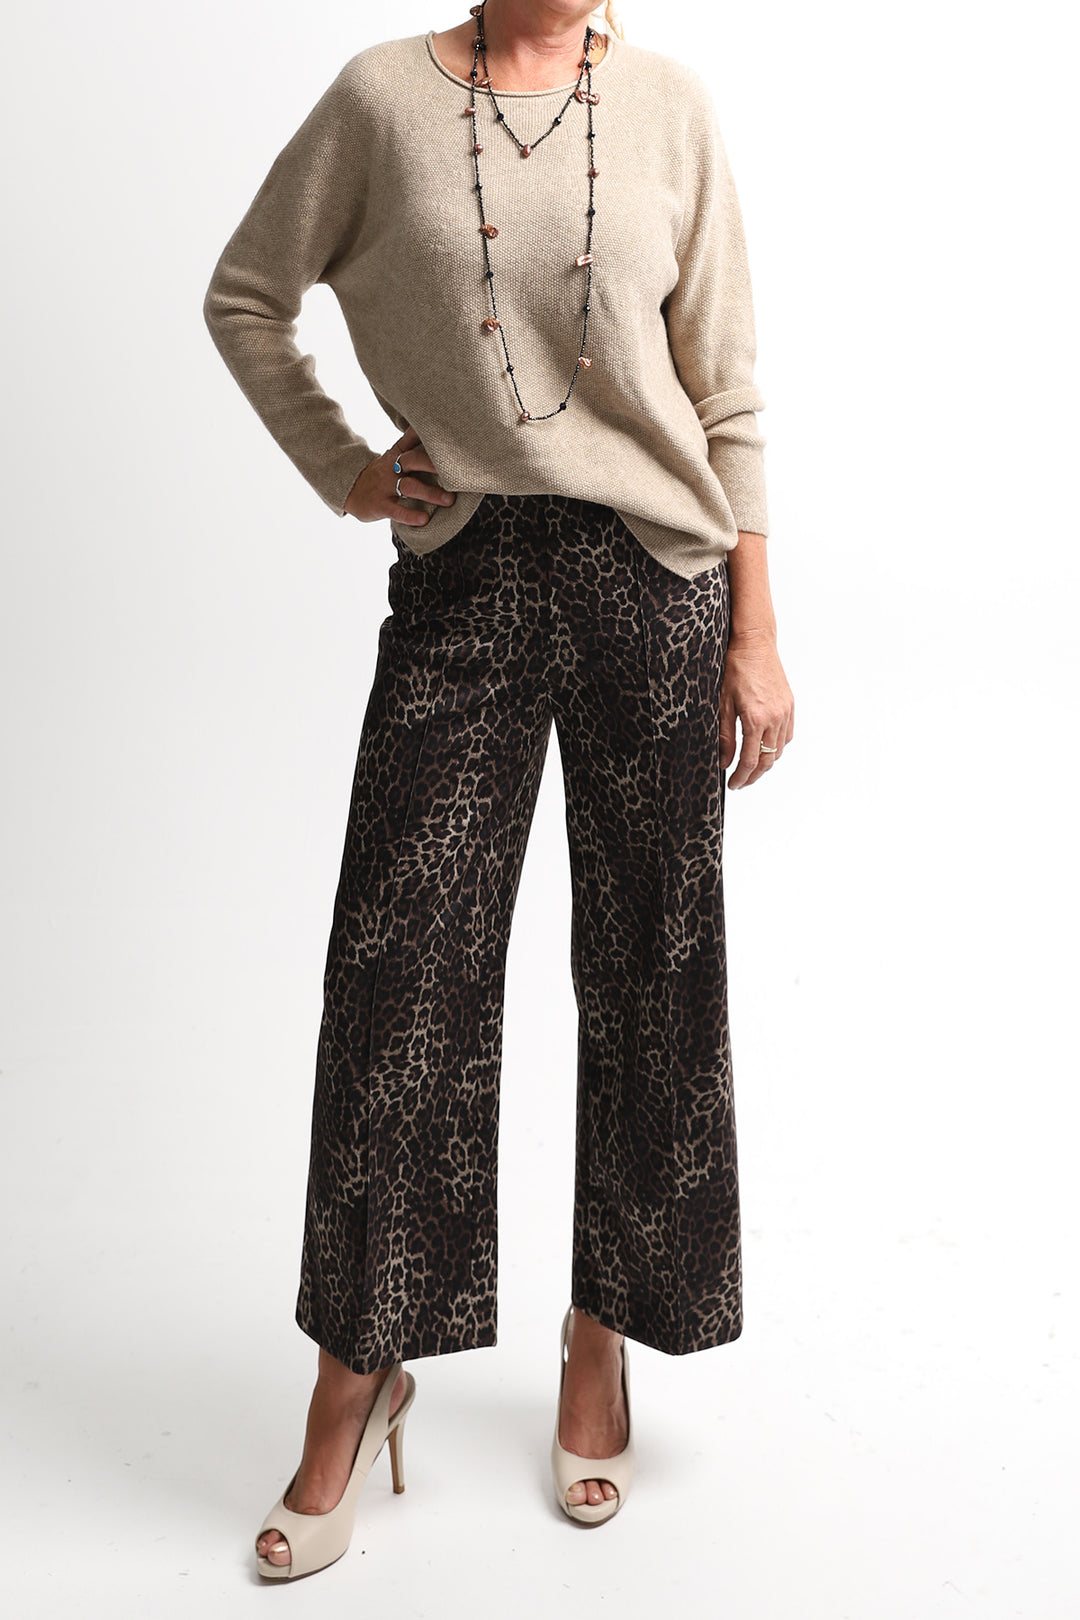 Woman wearing a pair of black pants by Frank Lyman from Pizazz Boutique Nelson 